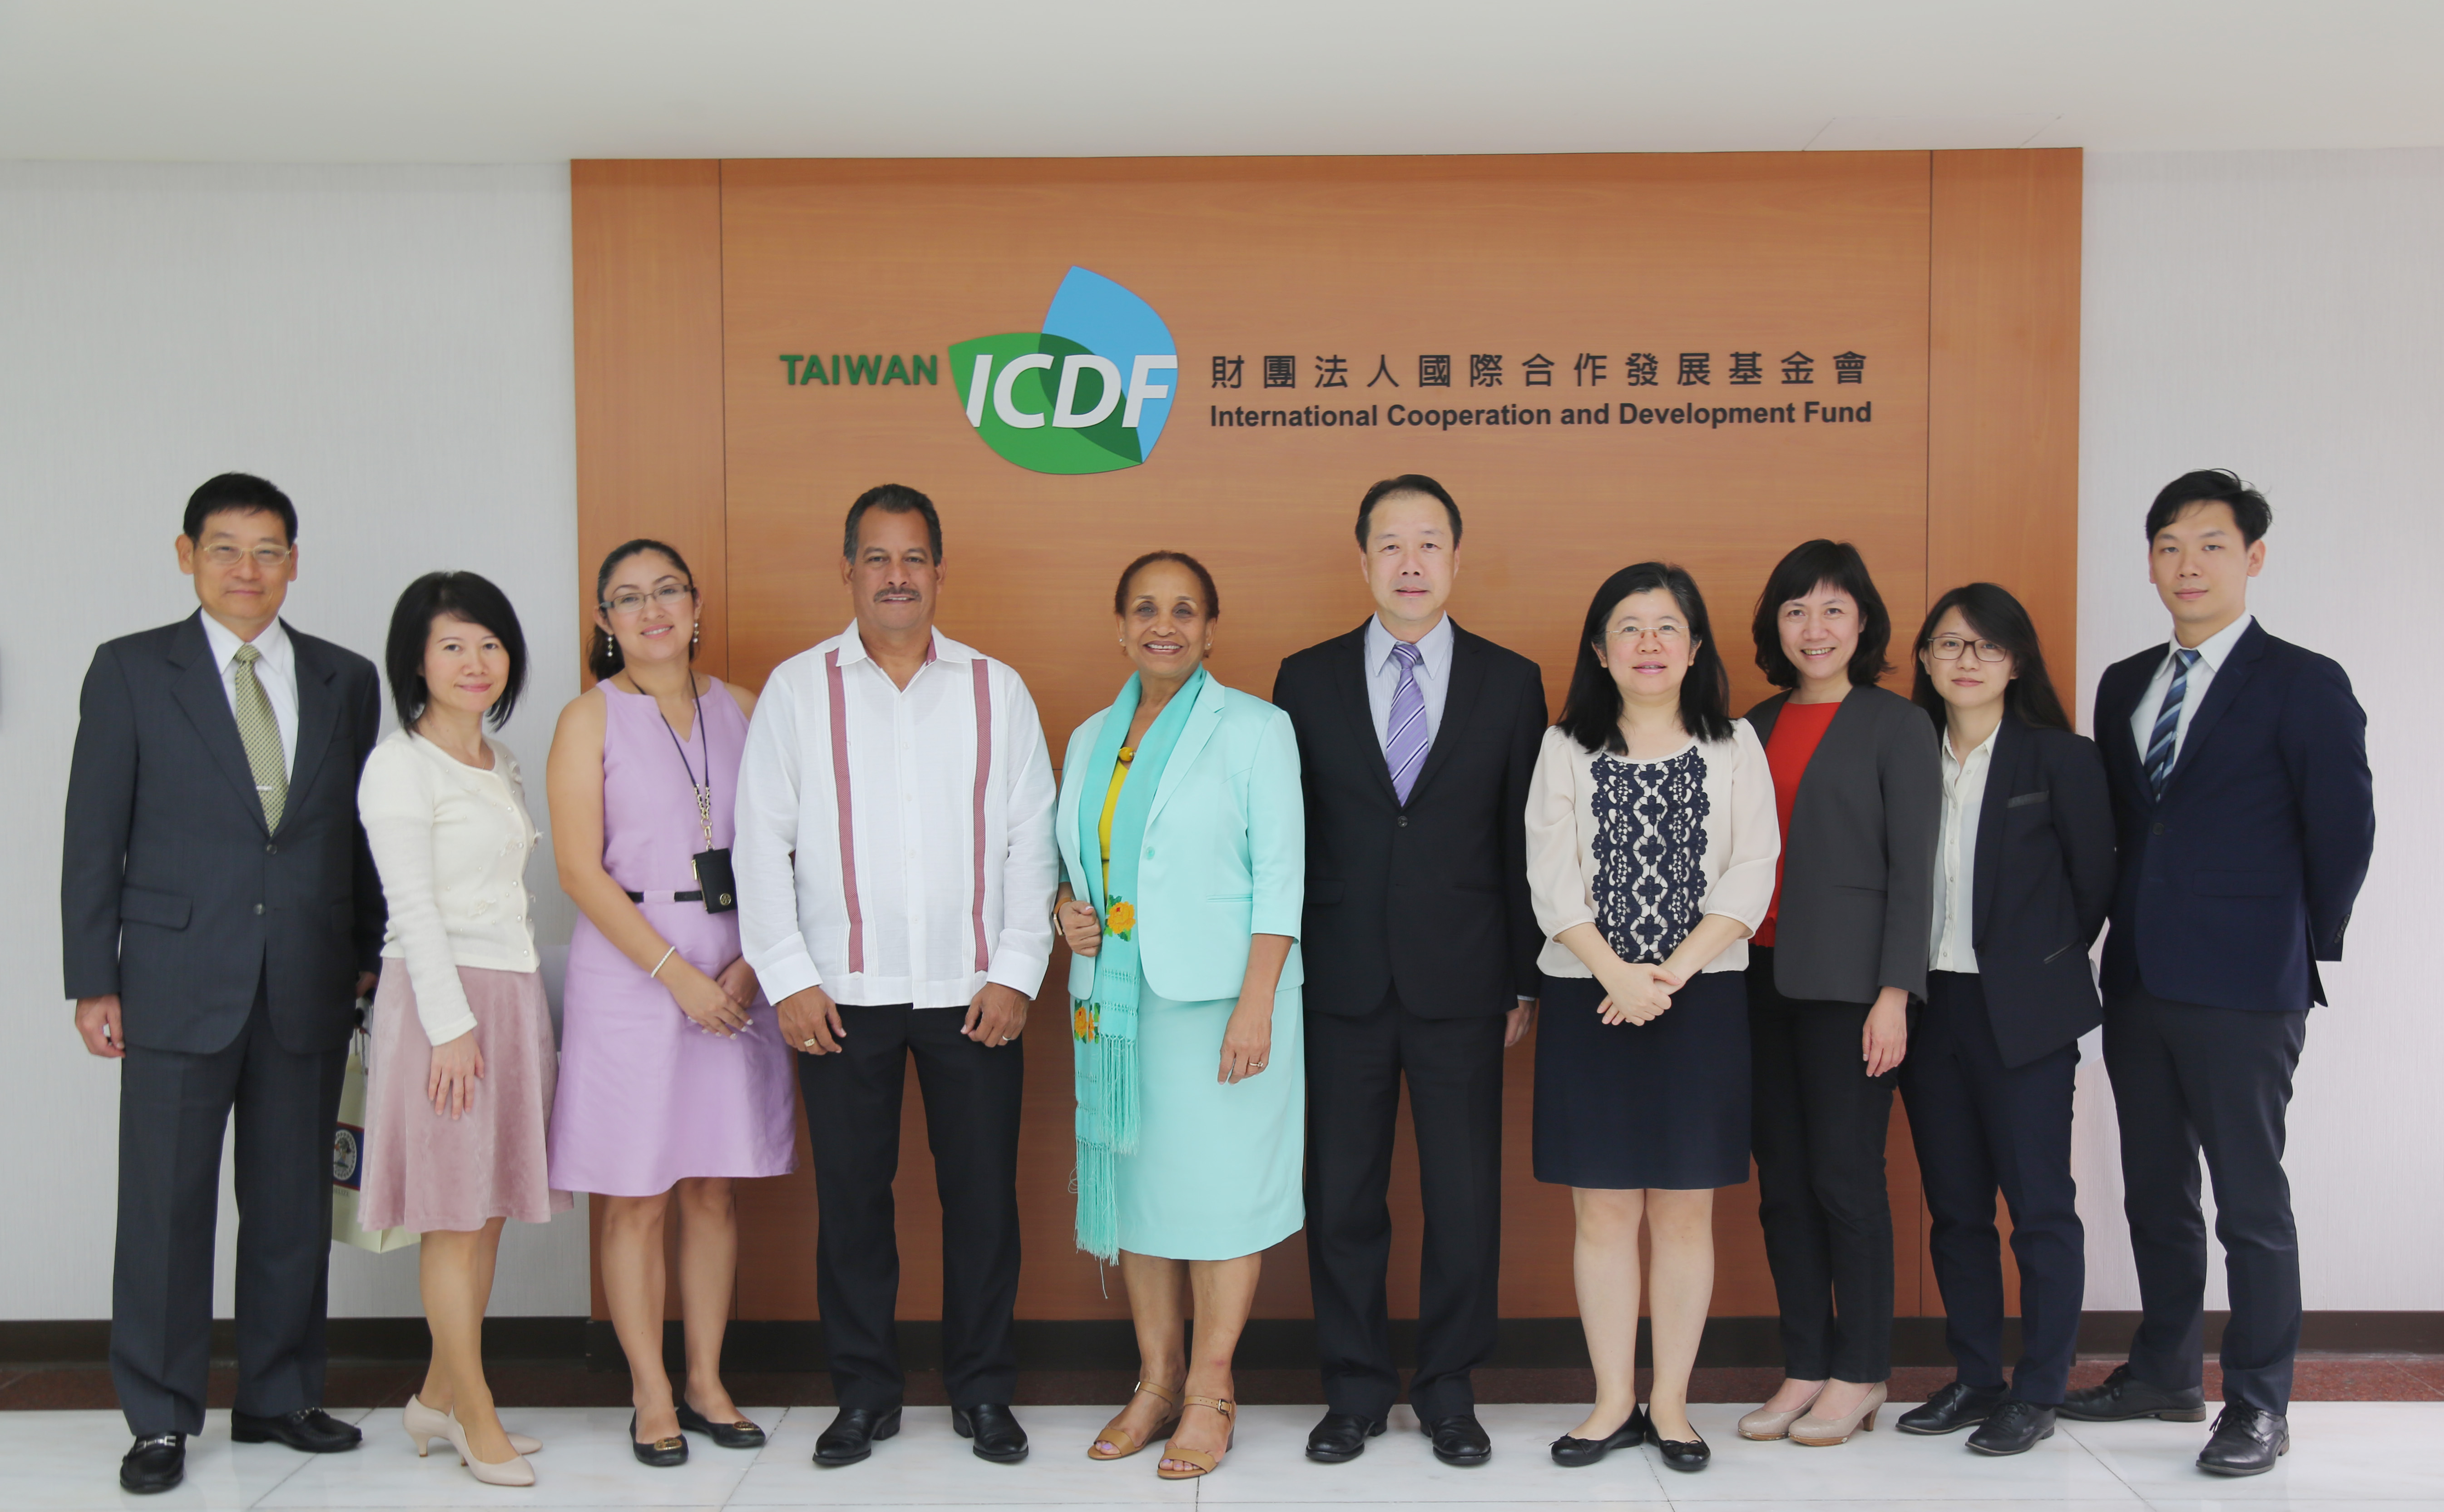 Belize Minister of Health Visits the TaiwanICDF